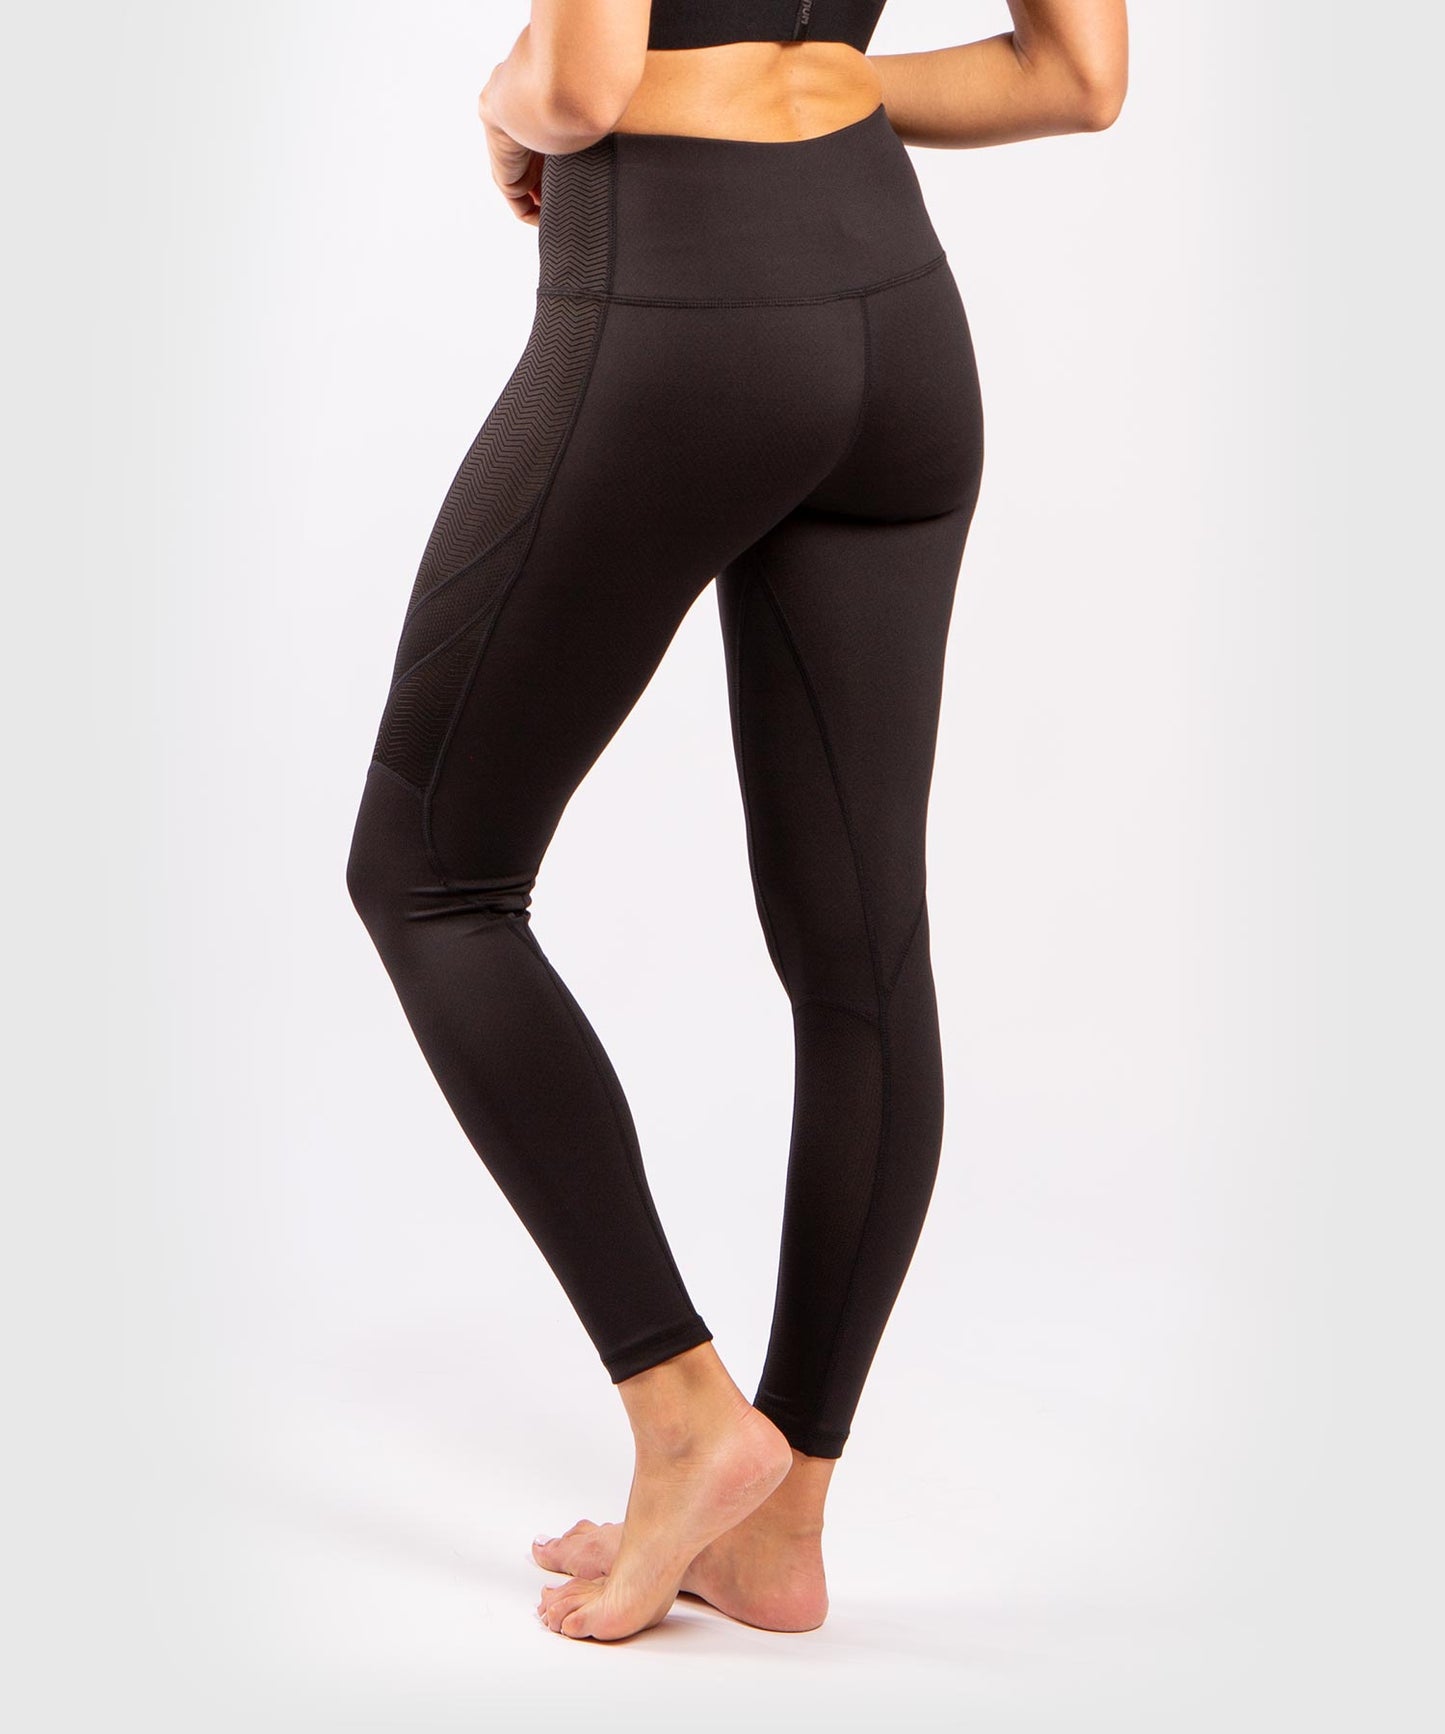 Zyia Active Polyester Blend Athletic Leggings for Women